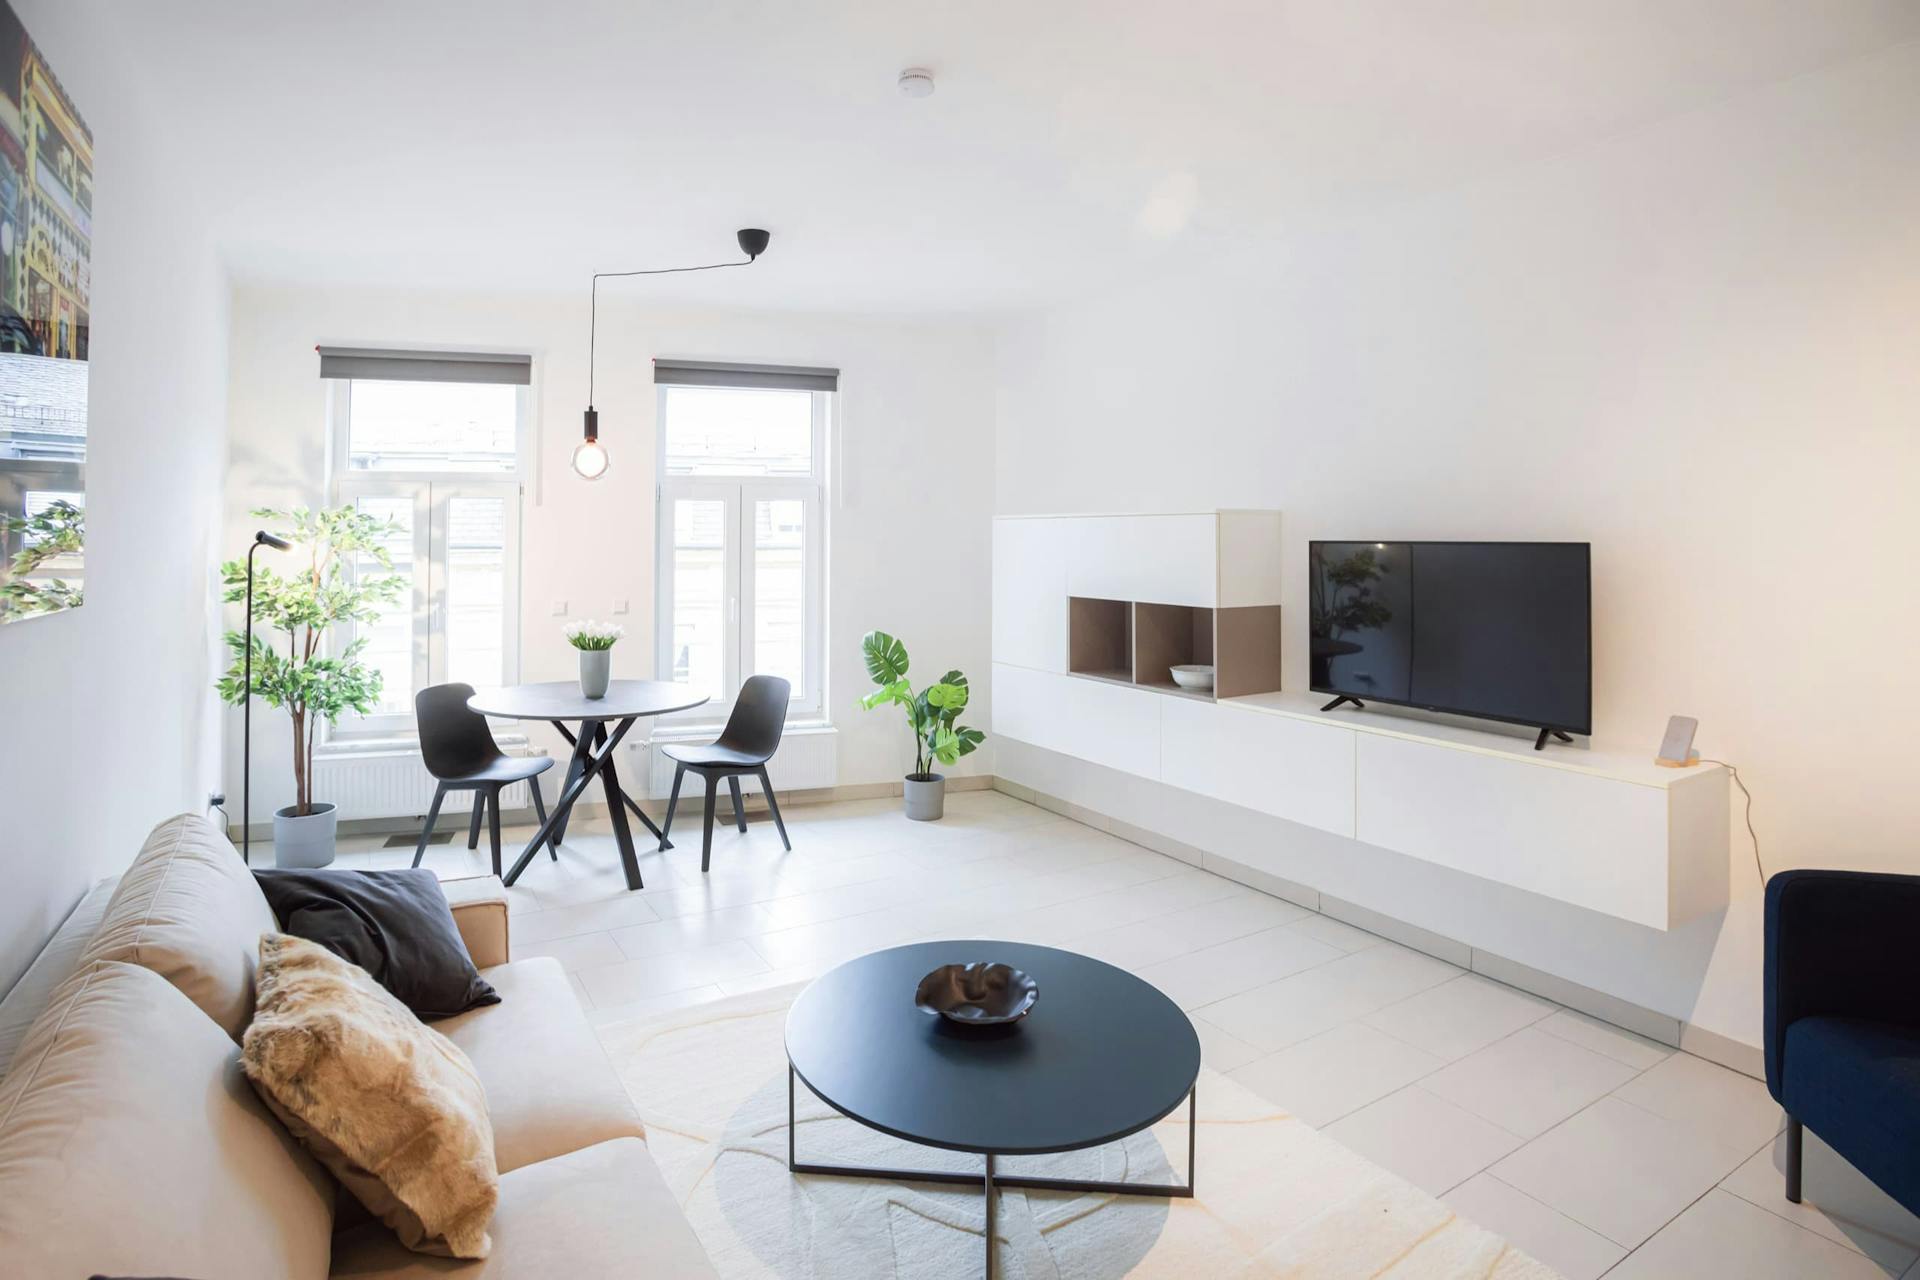 Lounge area comprised of a sofa with cushions and a coffee table with a white carpet underneath. In front of the sofa is a TV stand with a smart TV on it. In front of two floor-to-ceiling windows is a dining table and chairs.